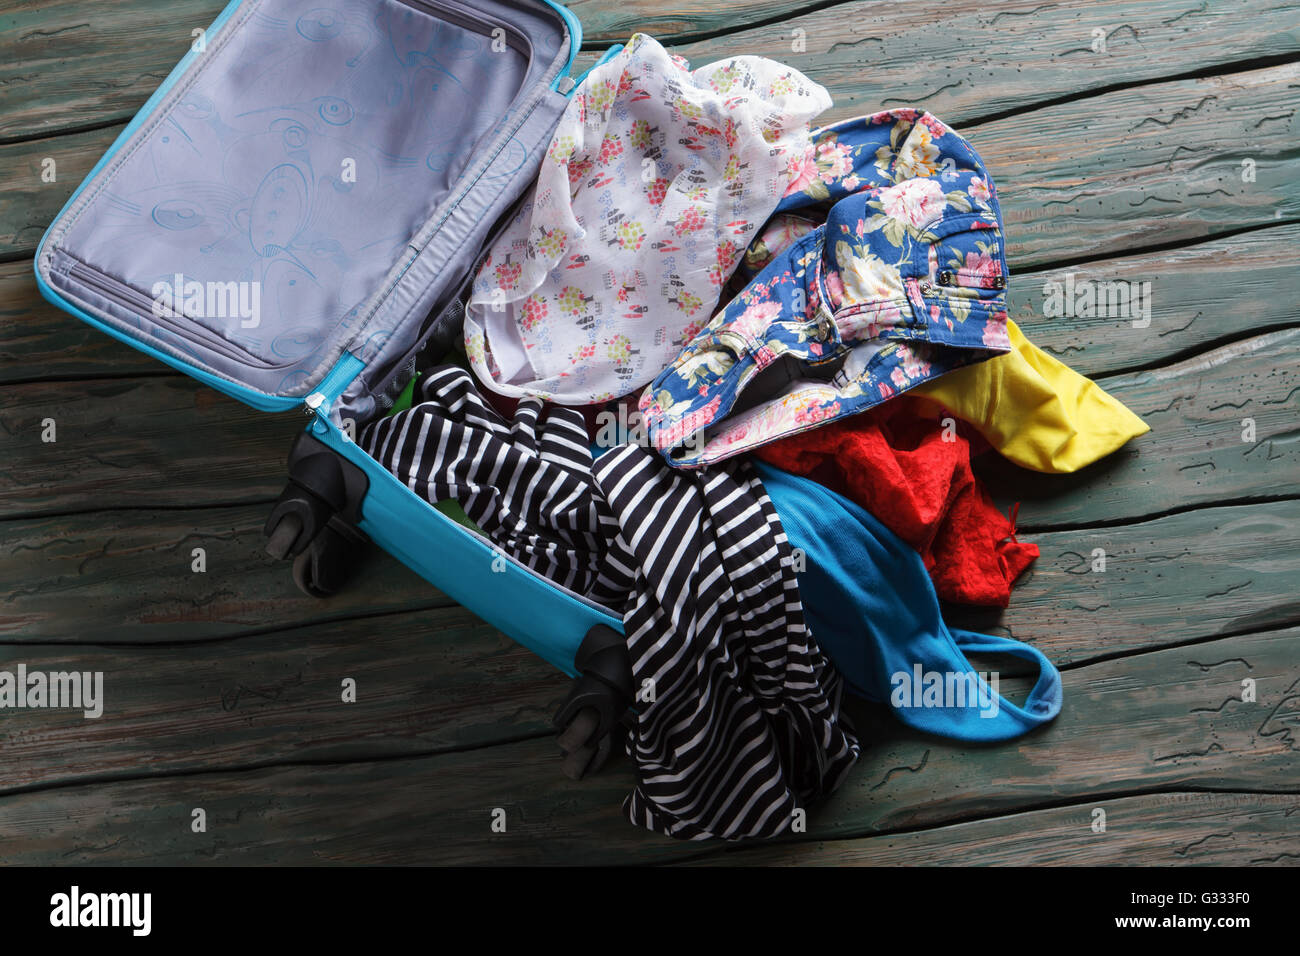 Opened suitcase with clothes. Stock Photo